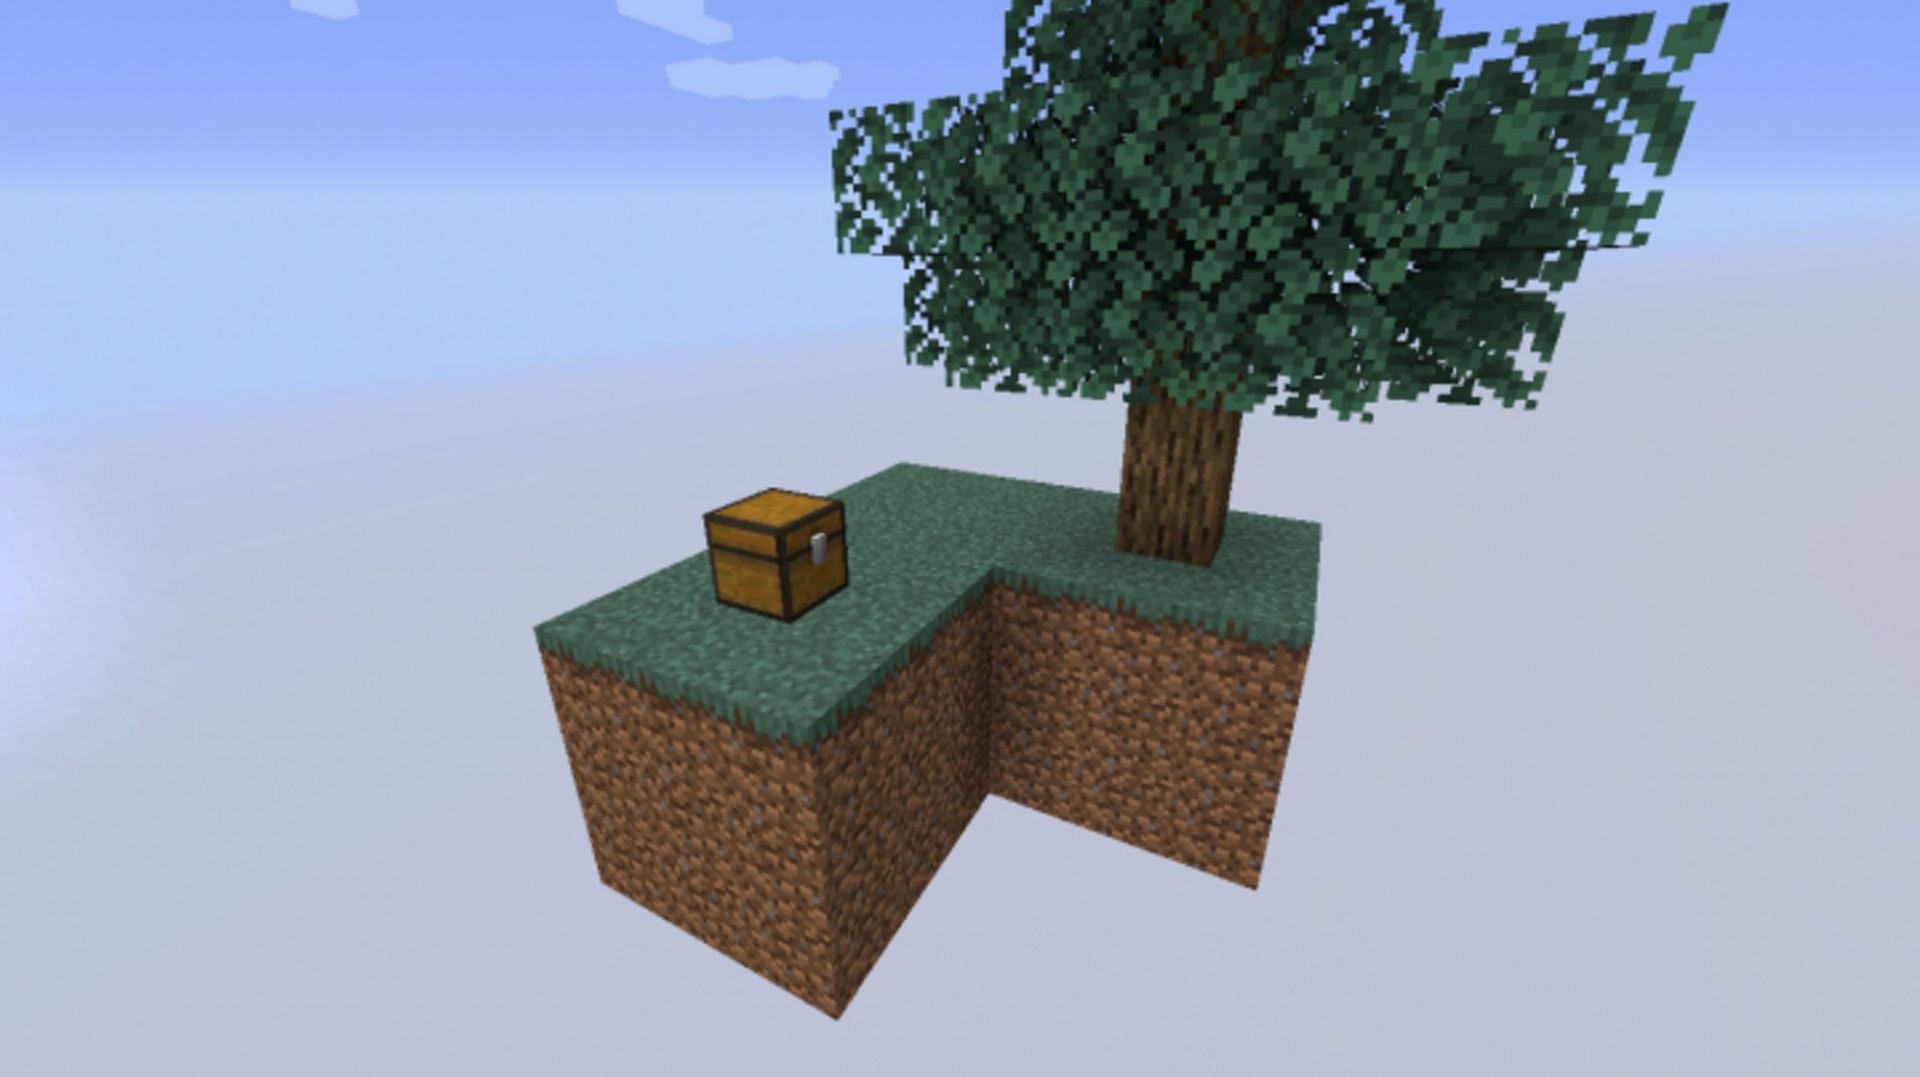 Skyblock is one of the most prevalent challenges in the Minecraft community (Image via Mojang)